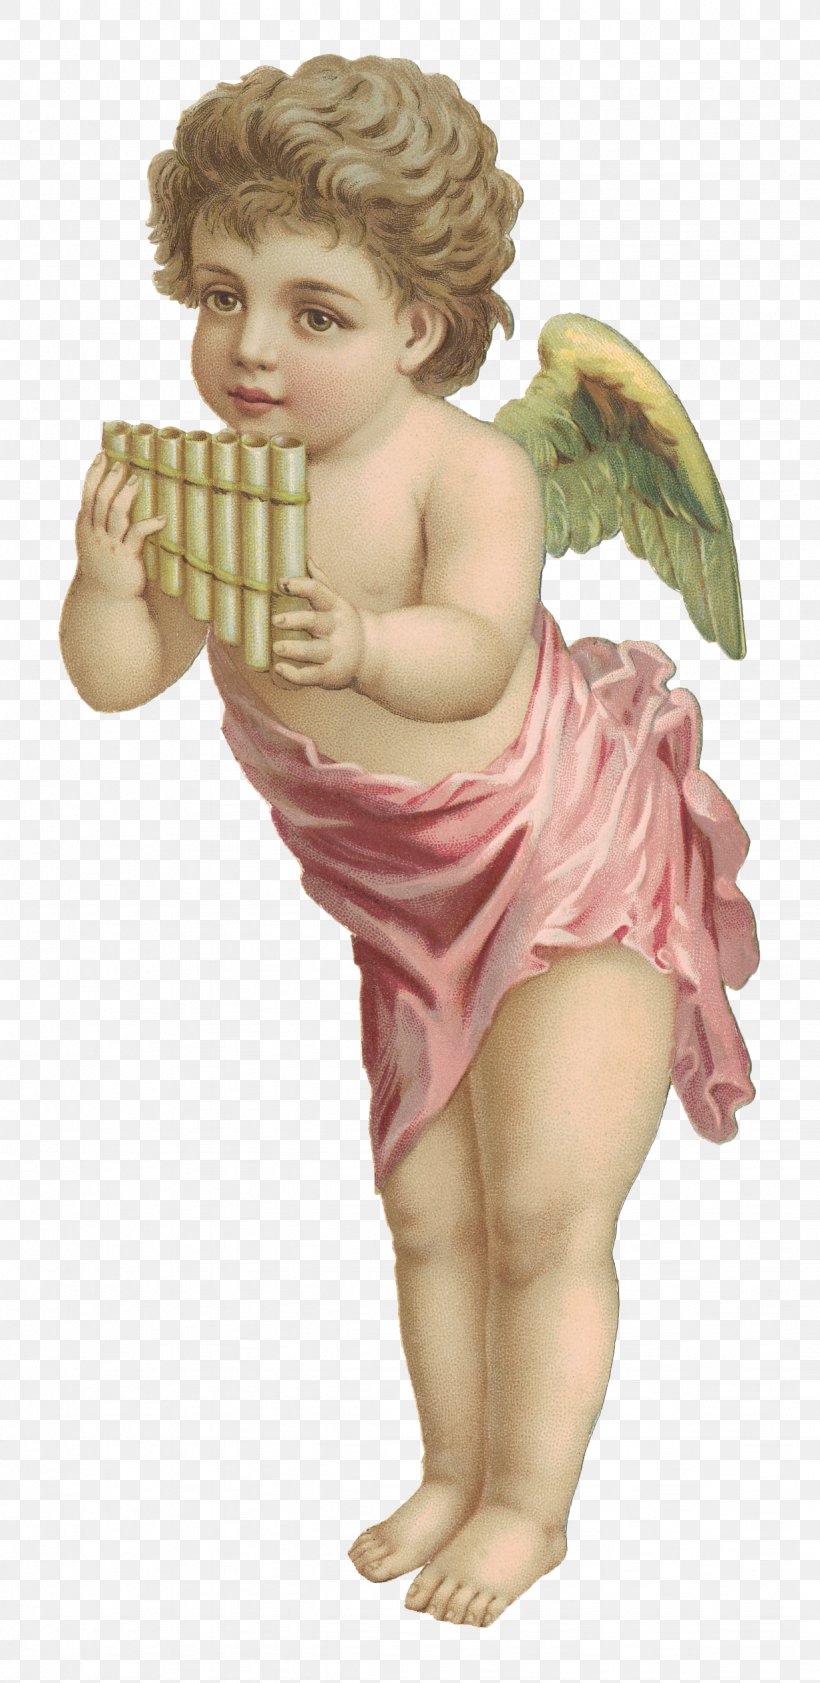 Angel Figurine Ceramic Massachusetts Institute Of Technology Toddler, PNG, 1228x2521px, Angel, Ceramic, Christmas, Engel, Fictional Character Download Free